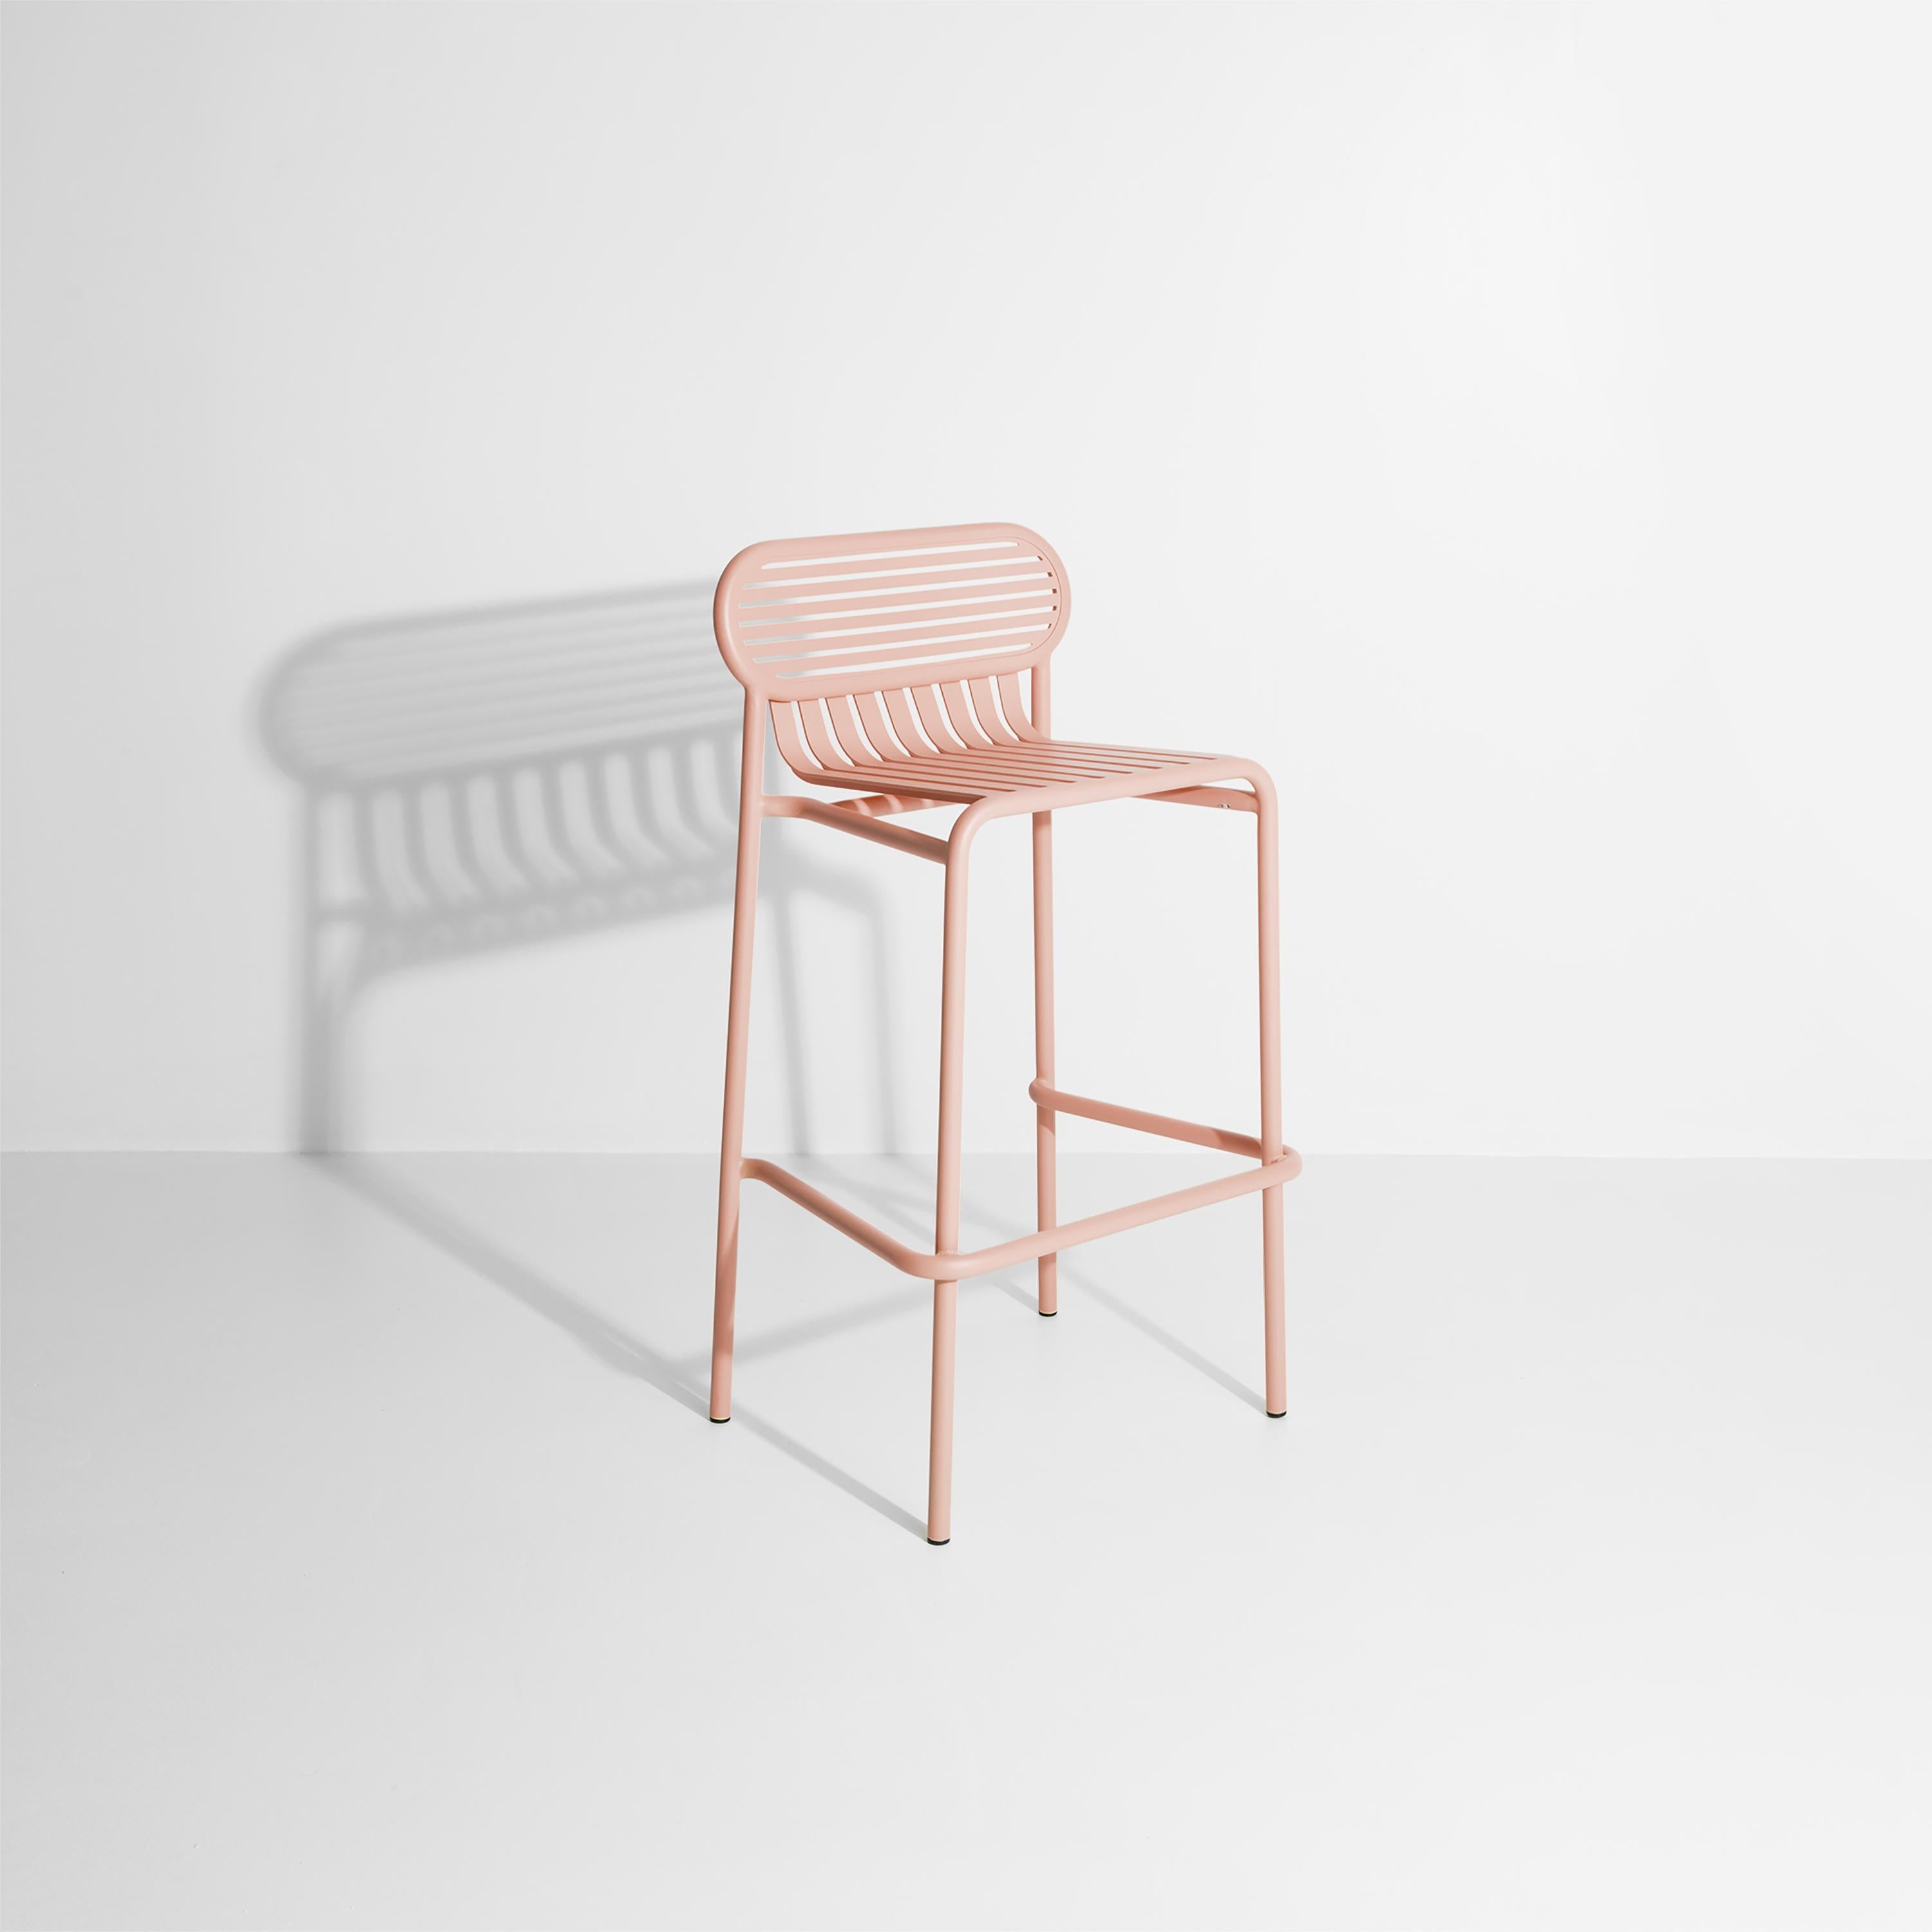 Petite Friture Week-End Bar Stool in Blush Aluminium by Studio BrichetZiegler, 2017

The week-end collection is a full range of outdoor furniture, in aluminium grained epoxy paint, matt finish, that includes 18 functions and 8 colours for the